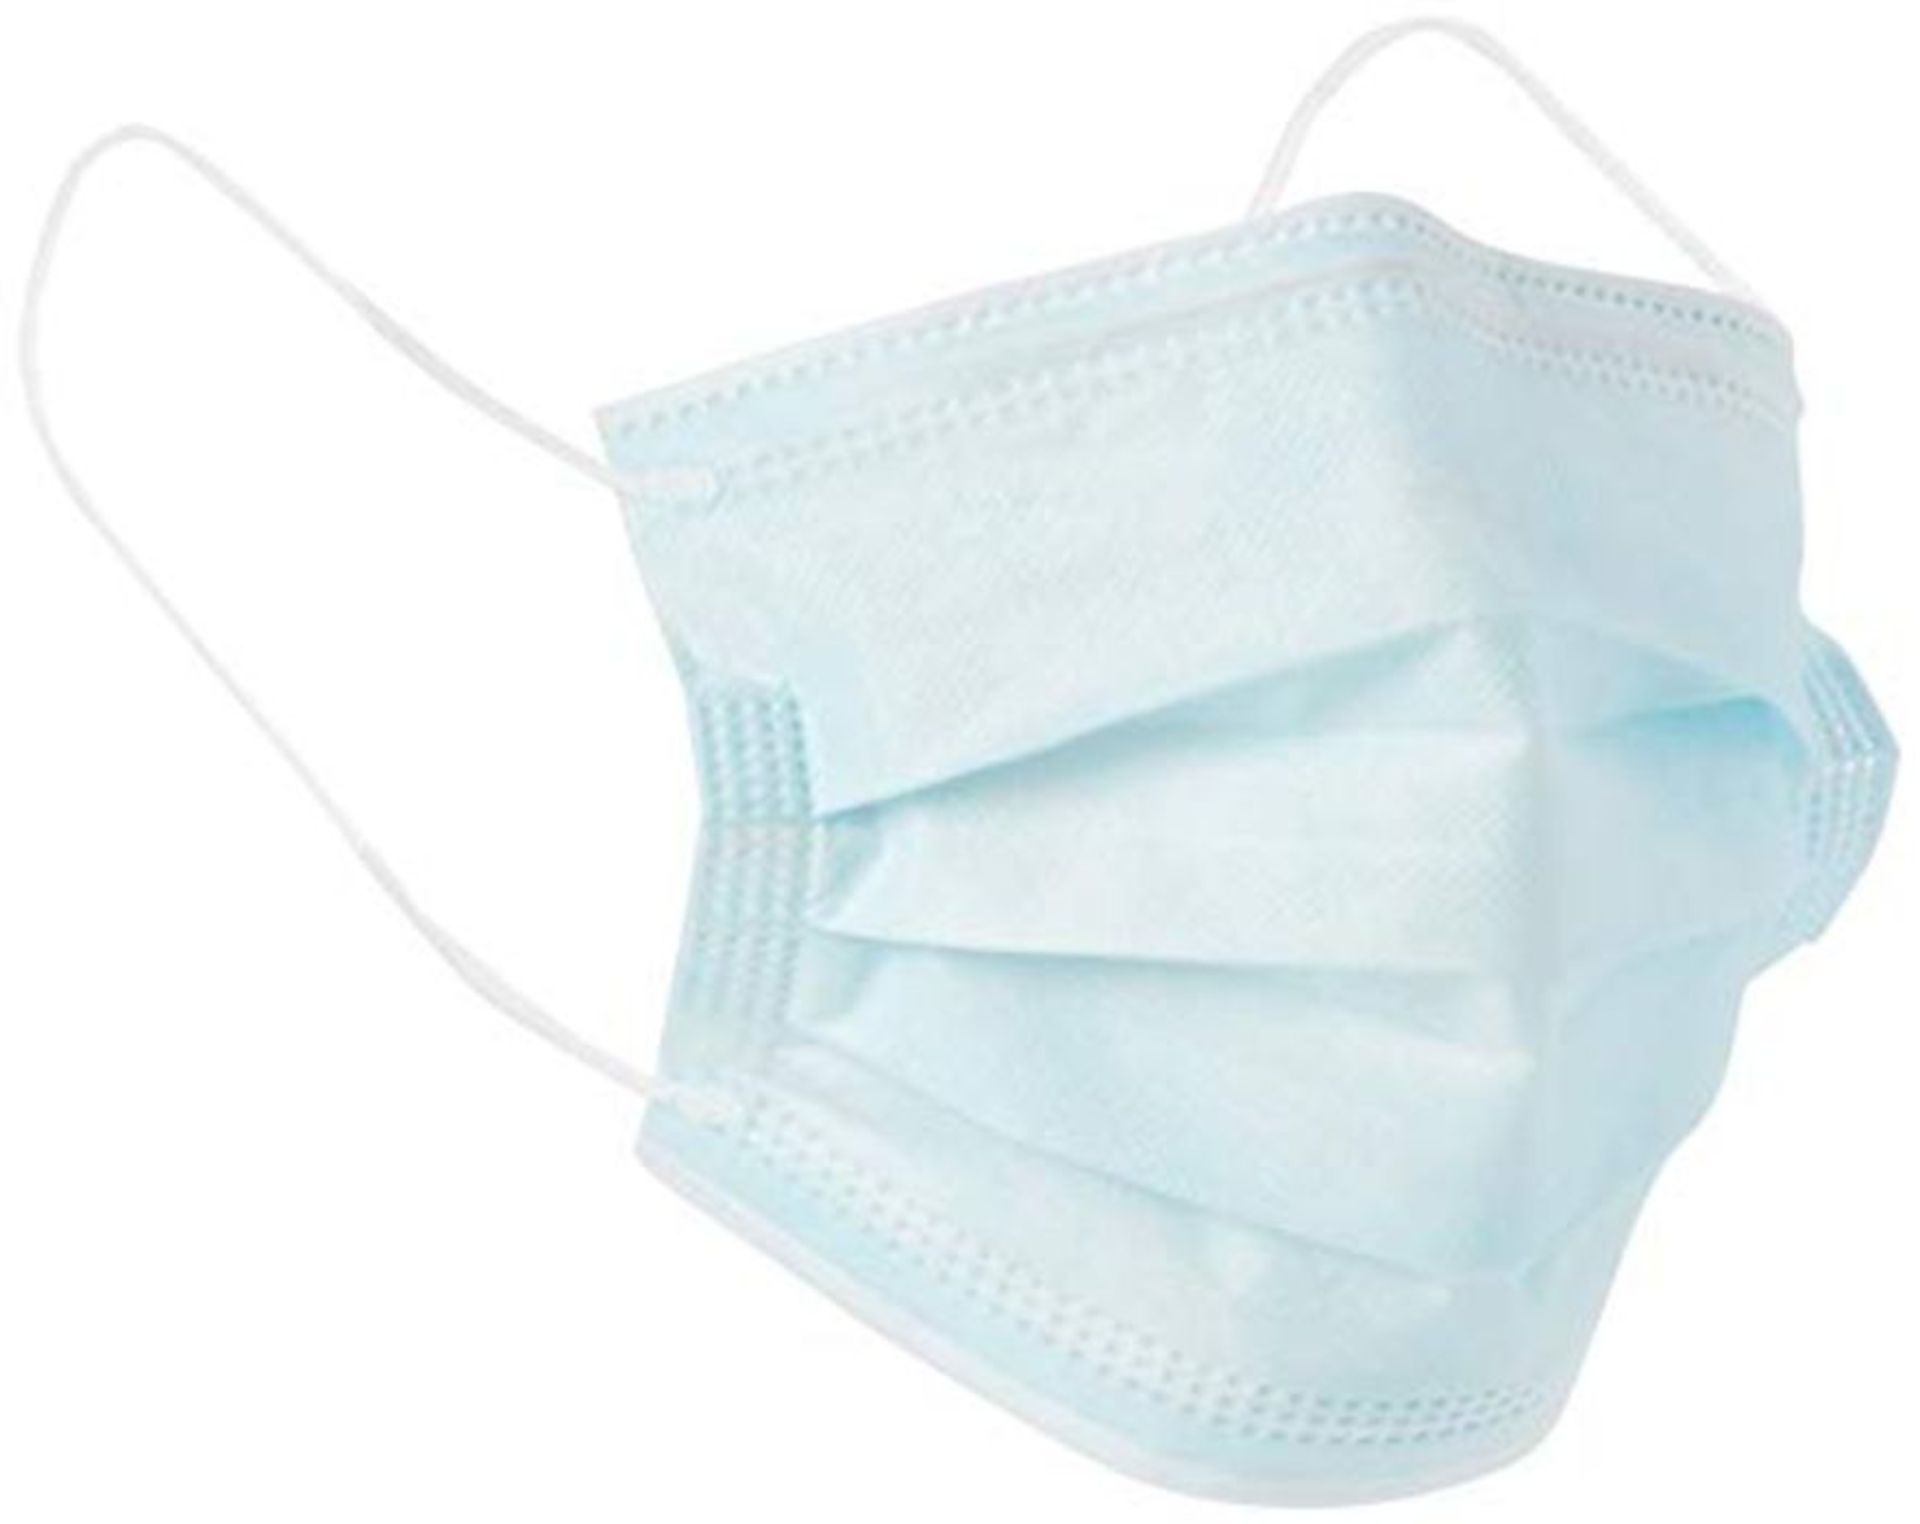 creek medical CE Approved and Tested 3-Layer Medical Surgical Mask Type I, Non-Sterile